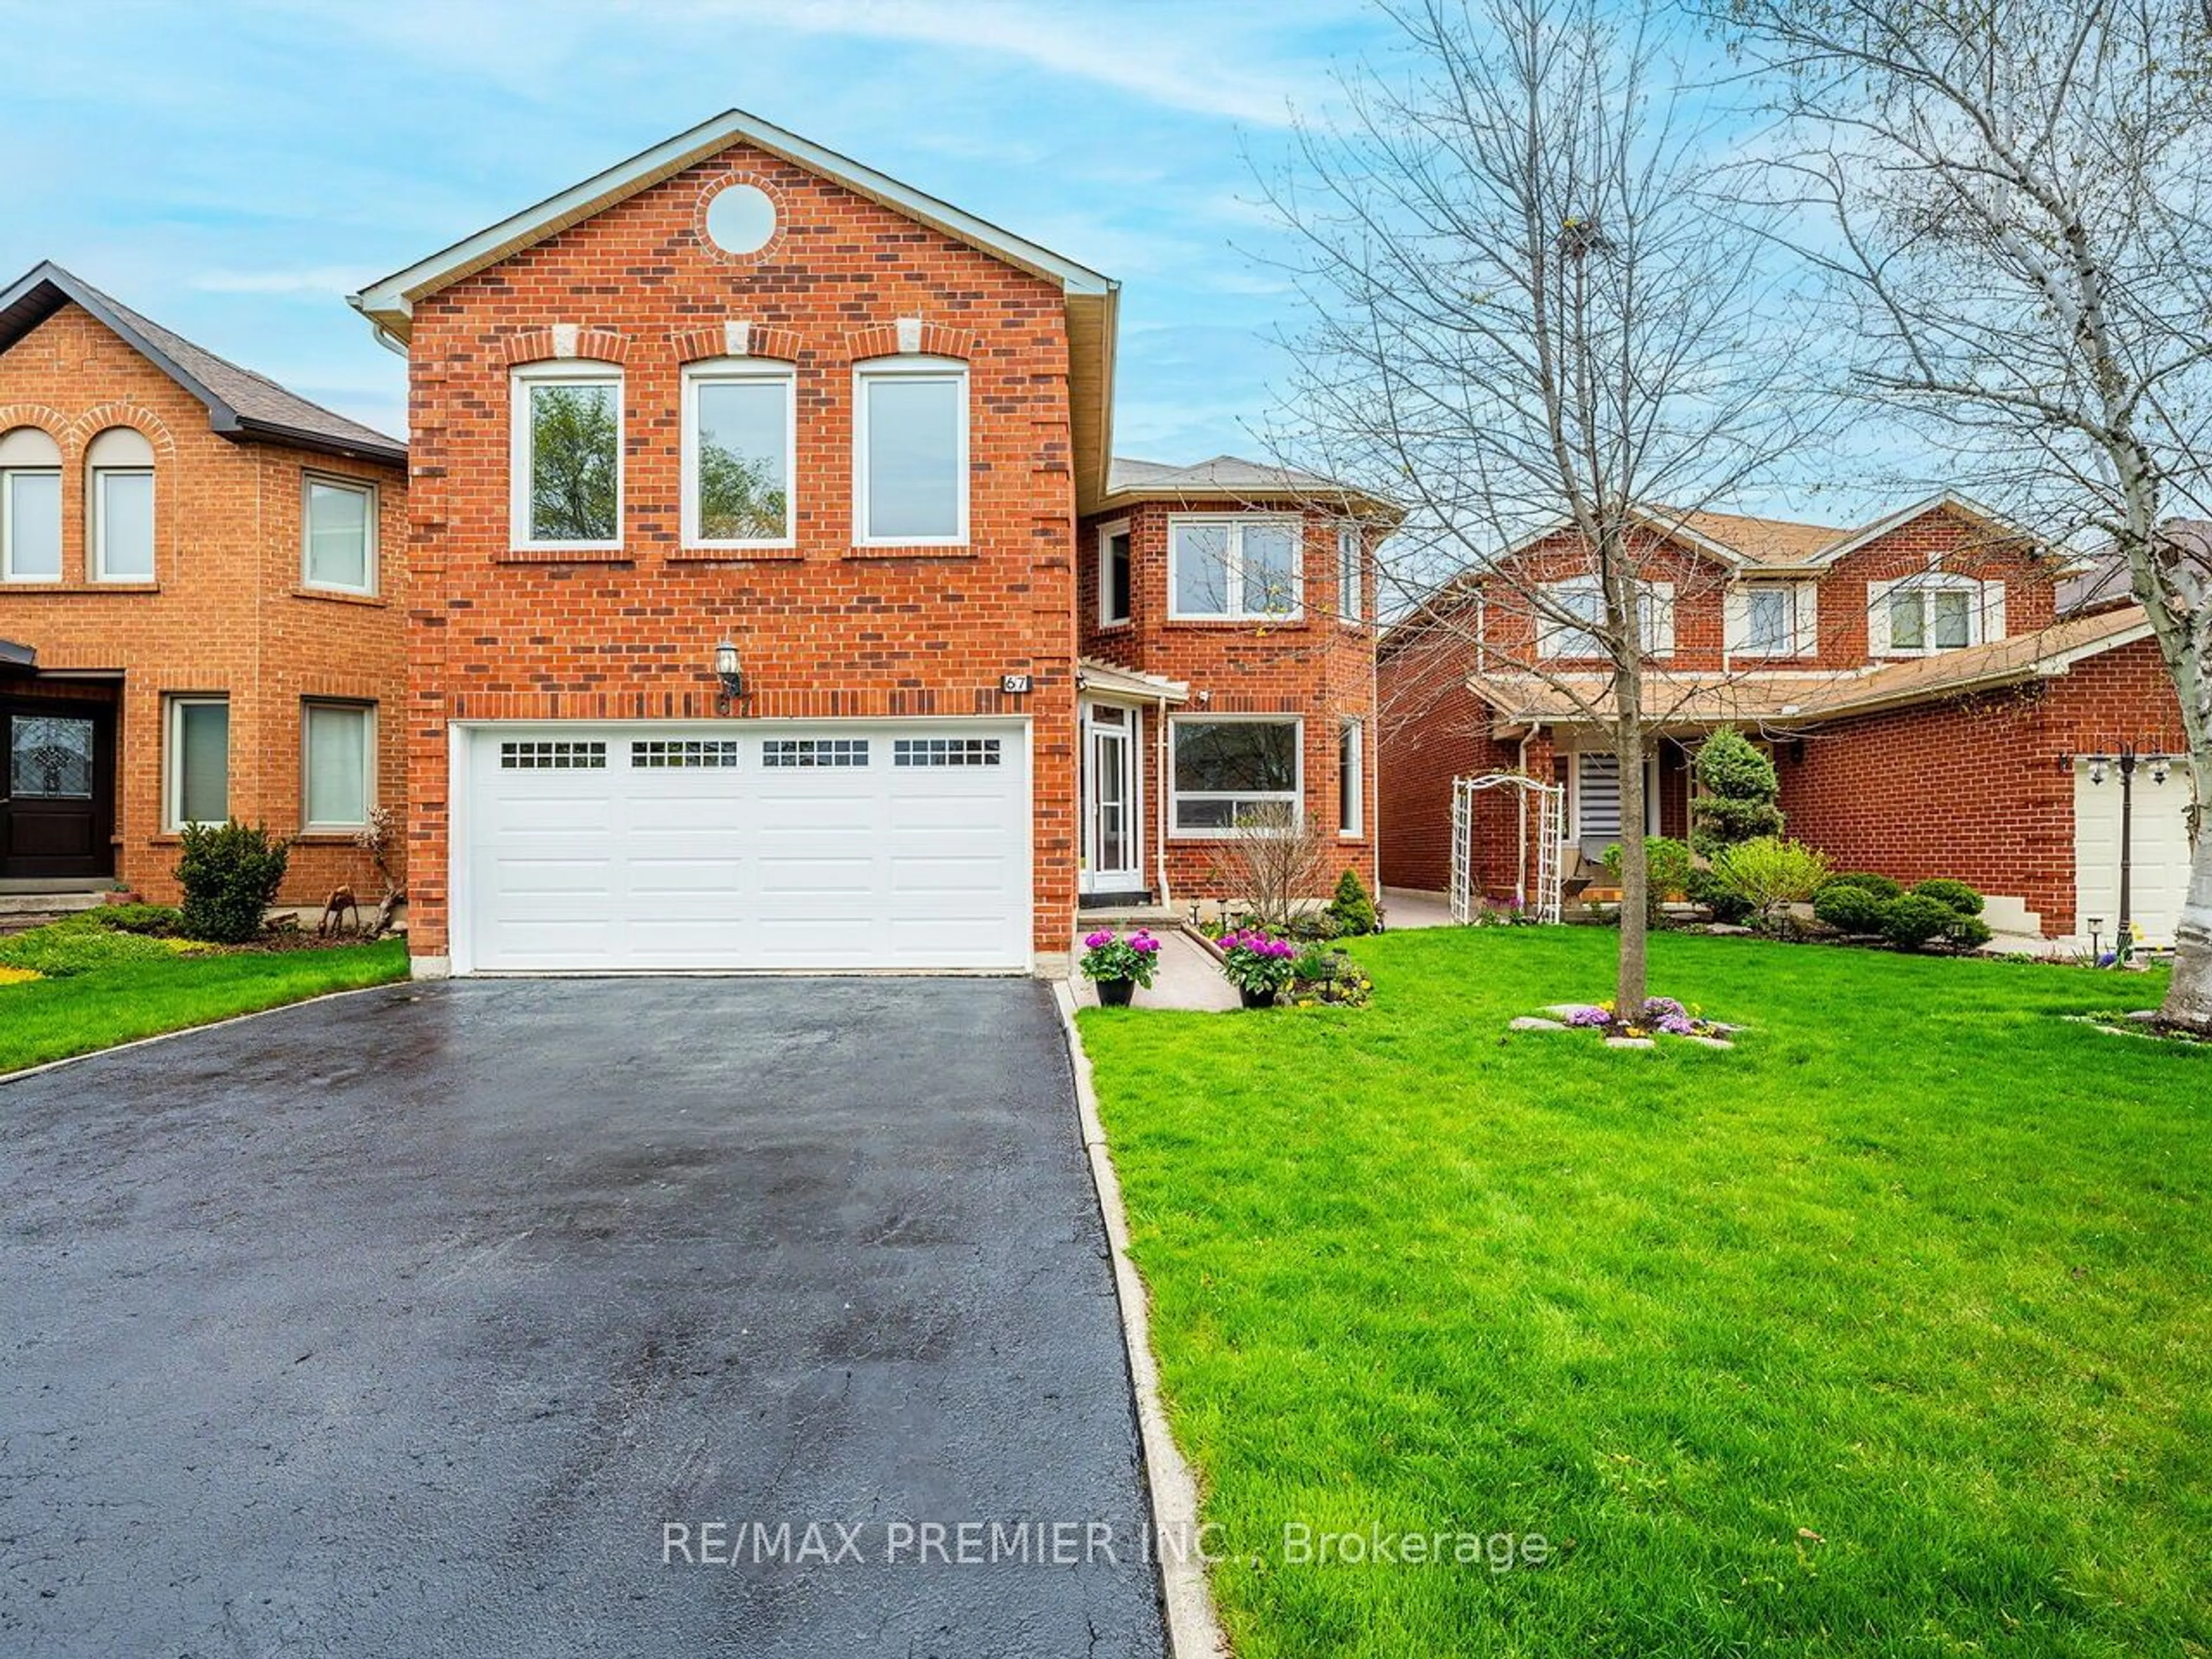 Home with brick exterior material for 67 Afton Cres, Vaughan Ontario L6A 1H5